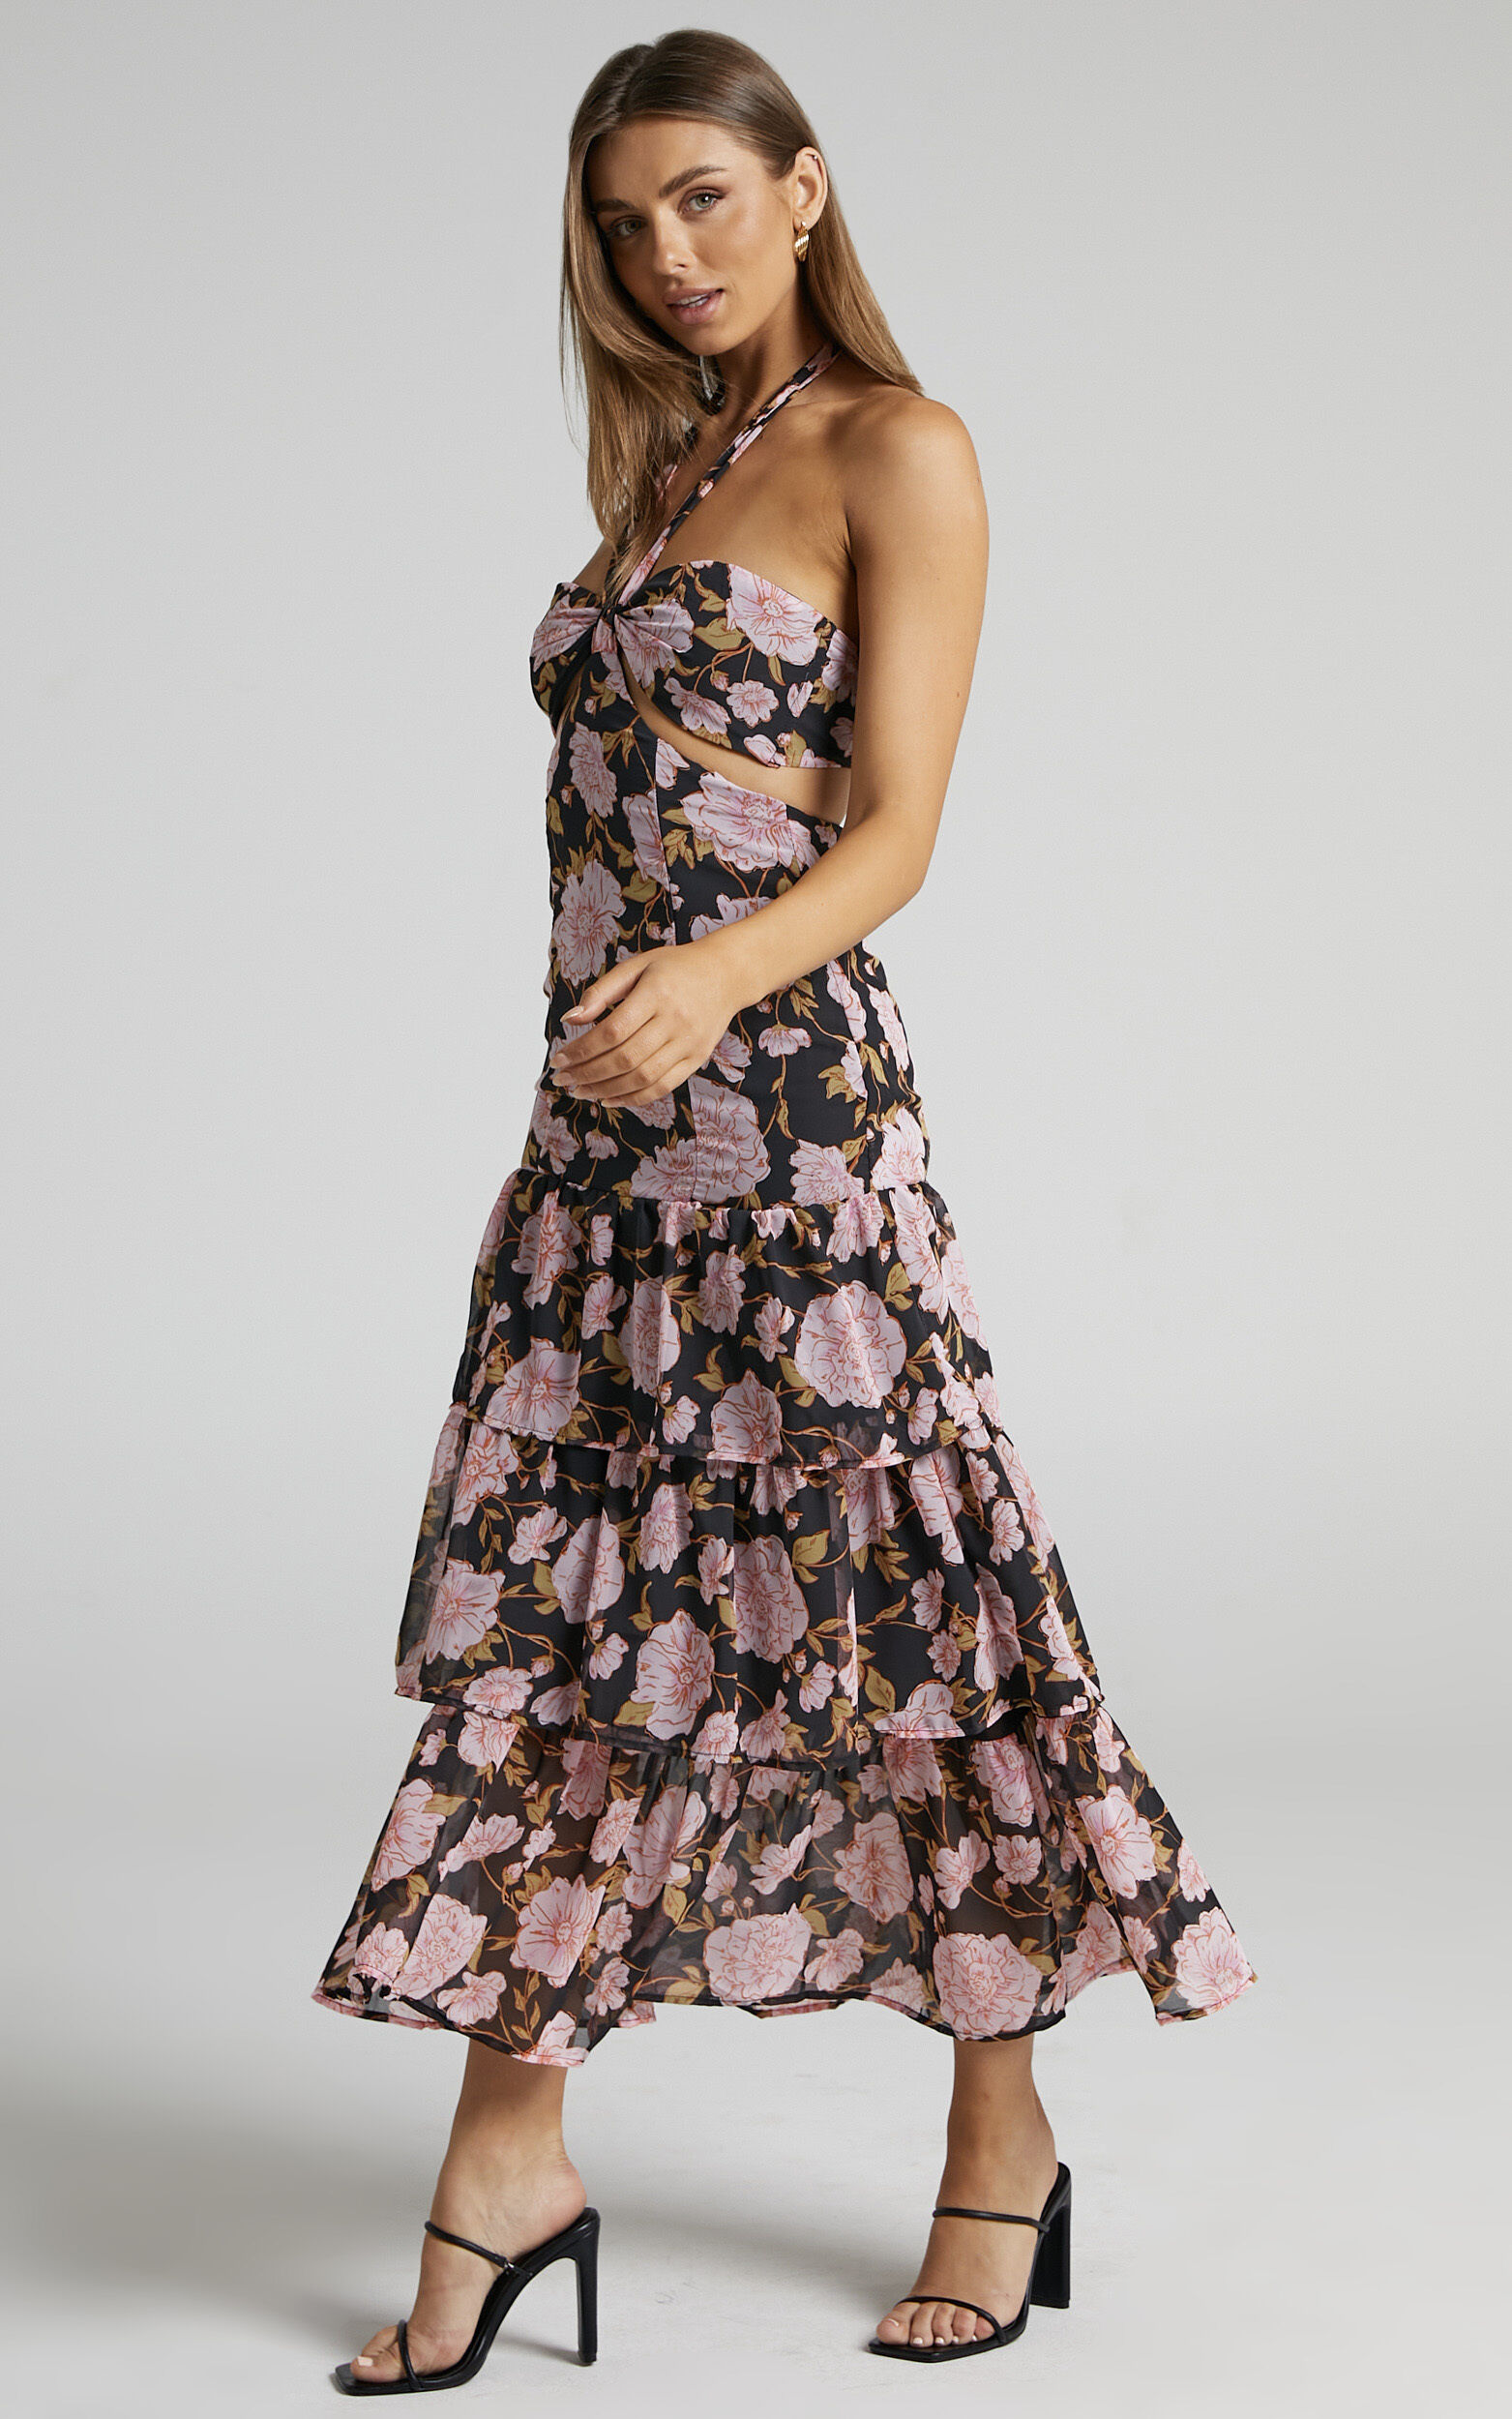 Cherrie Halter Neck Cut Out Tiered Midi Dress in Romantic Floral - 06, BLK1, super-hi-res image number null